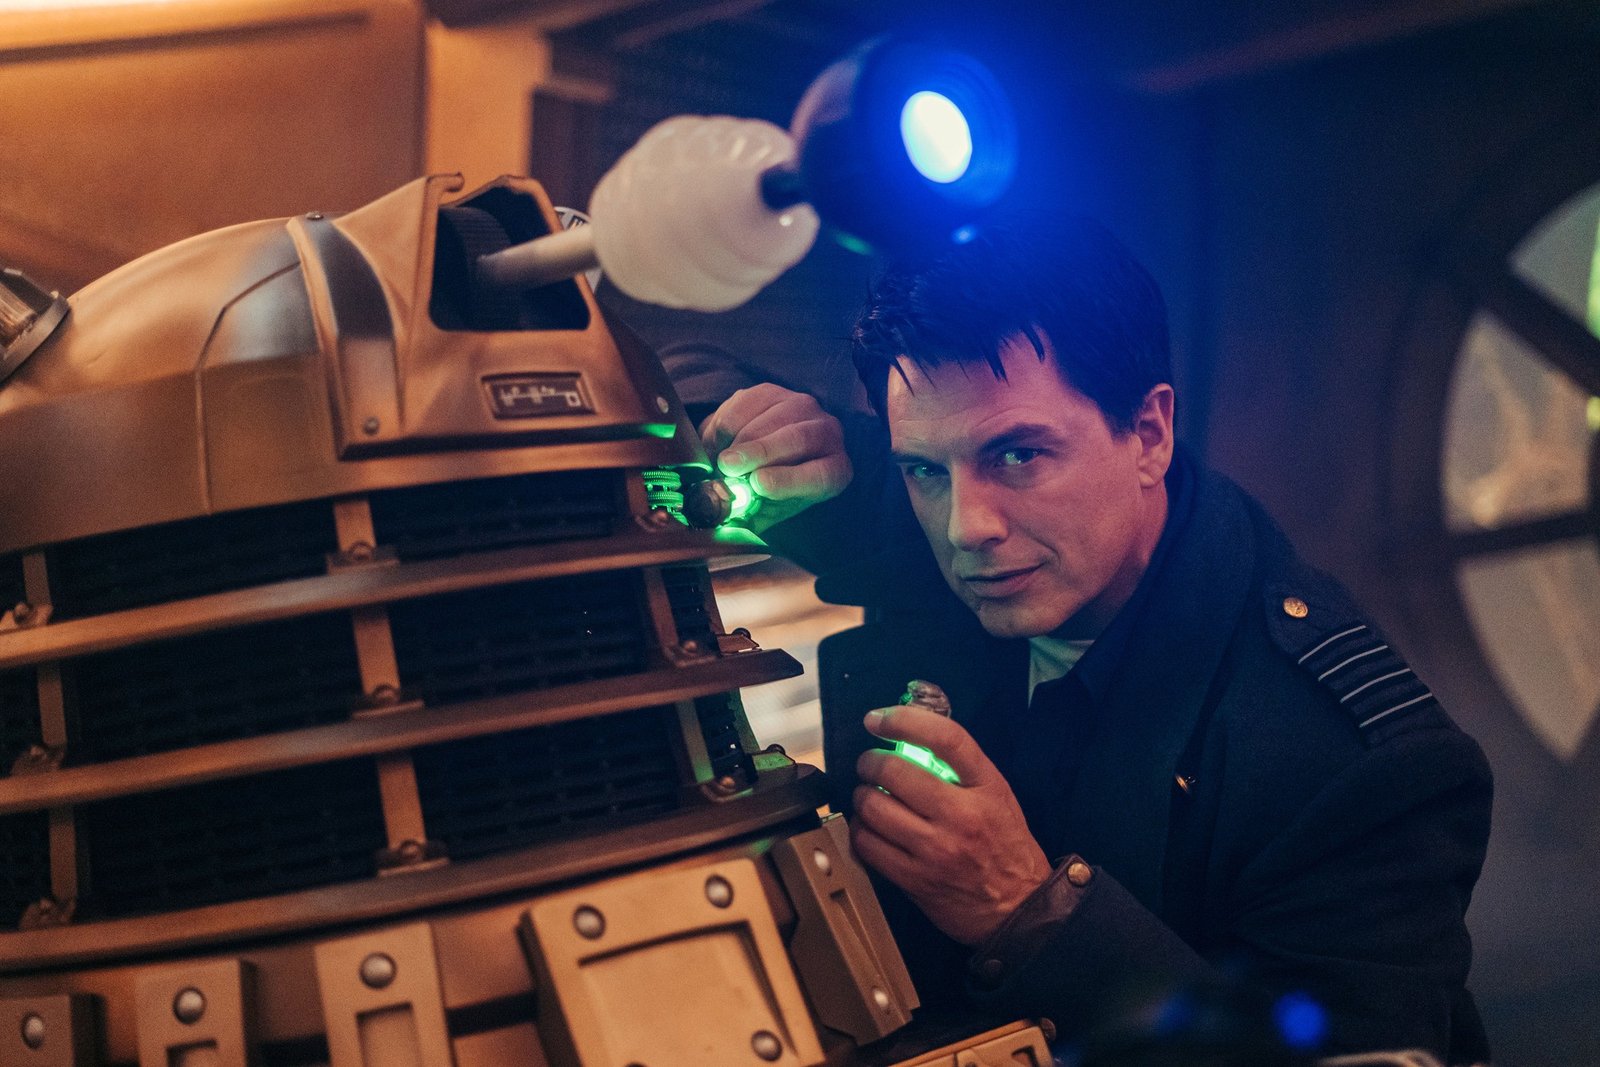 Here’s What The Doctor Who Companion Thought of Revolution of the Daleks